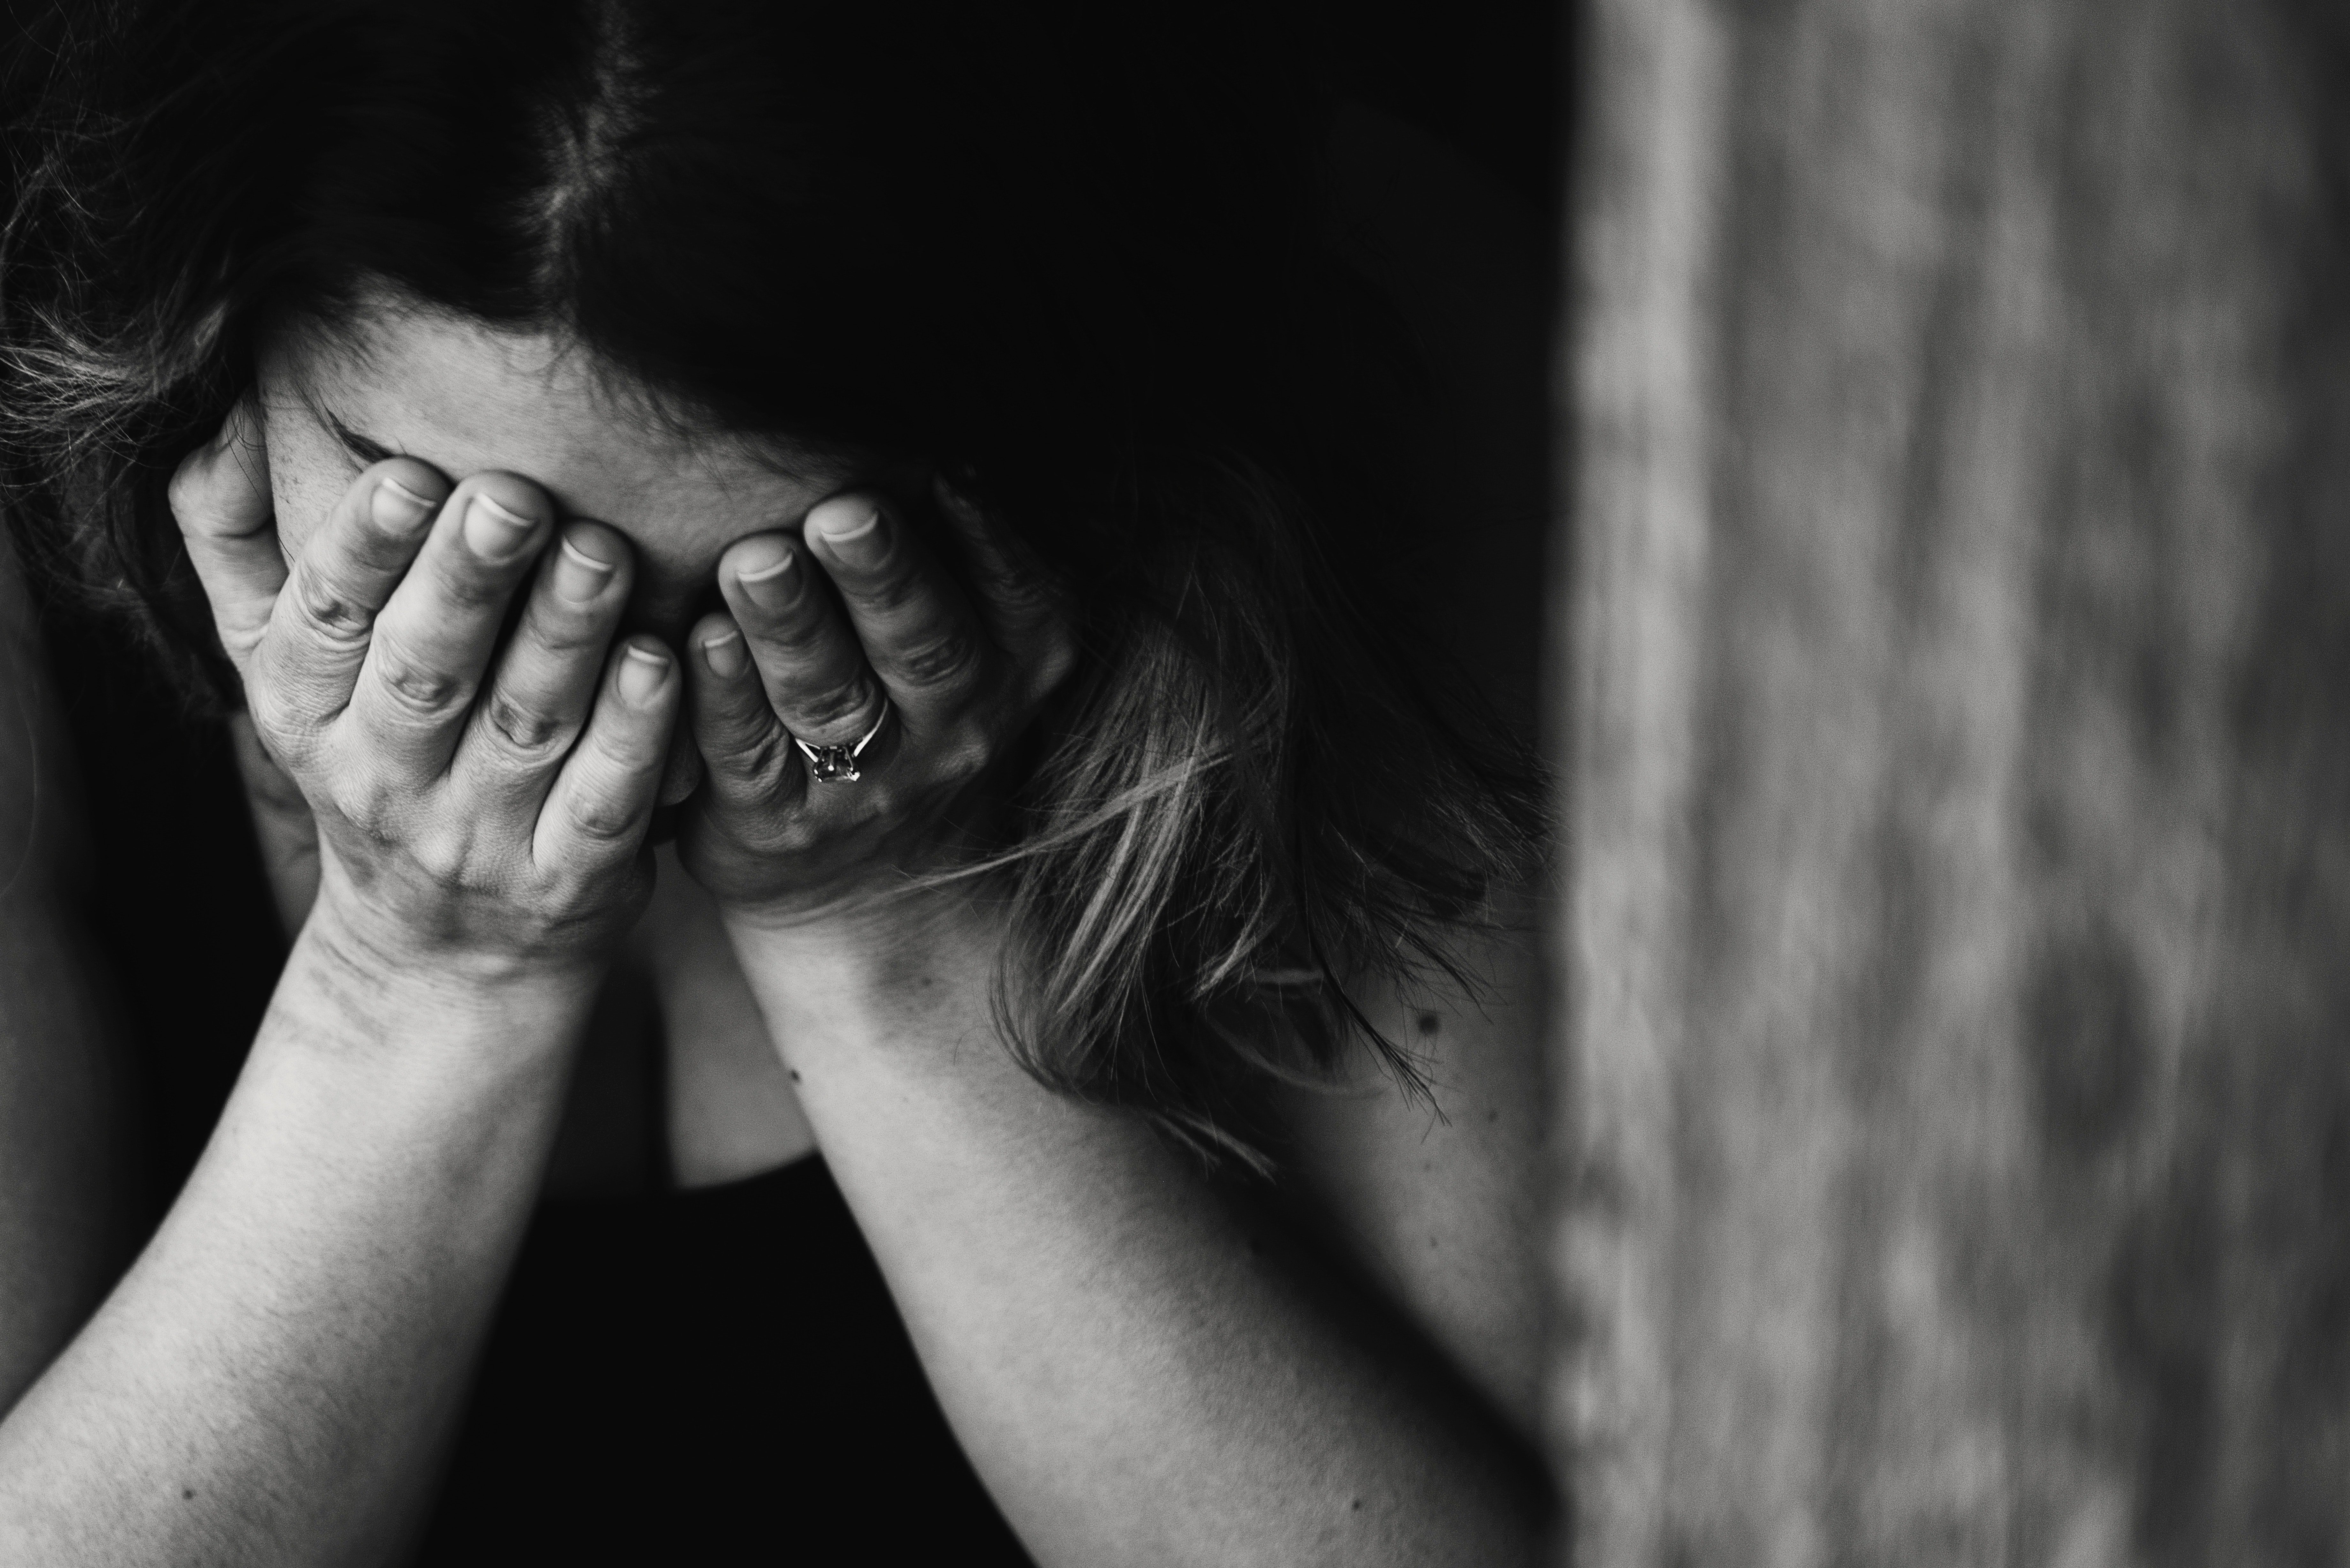 Leslie couldn't help but cry after realizing what Darien did for her. | Source: Pexels